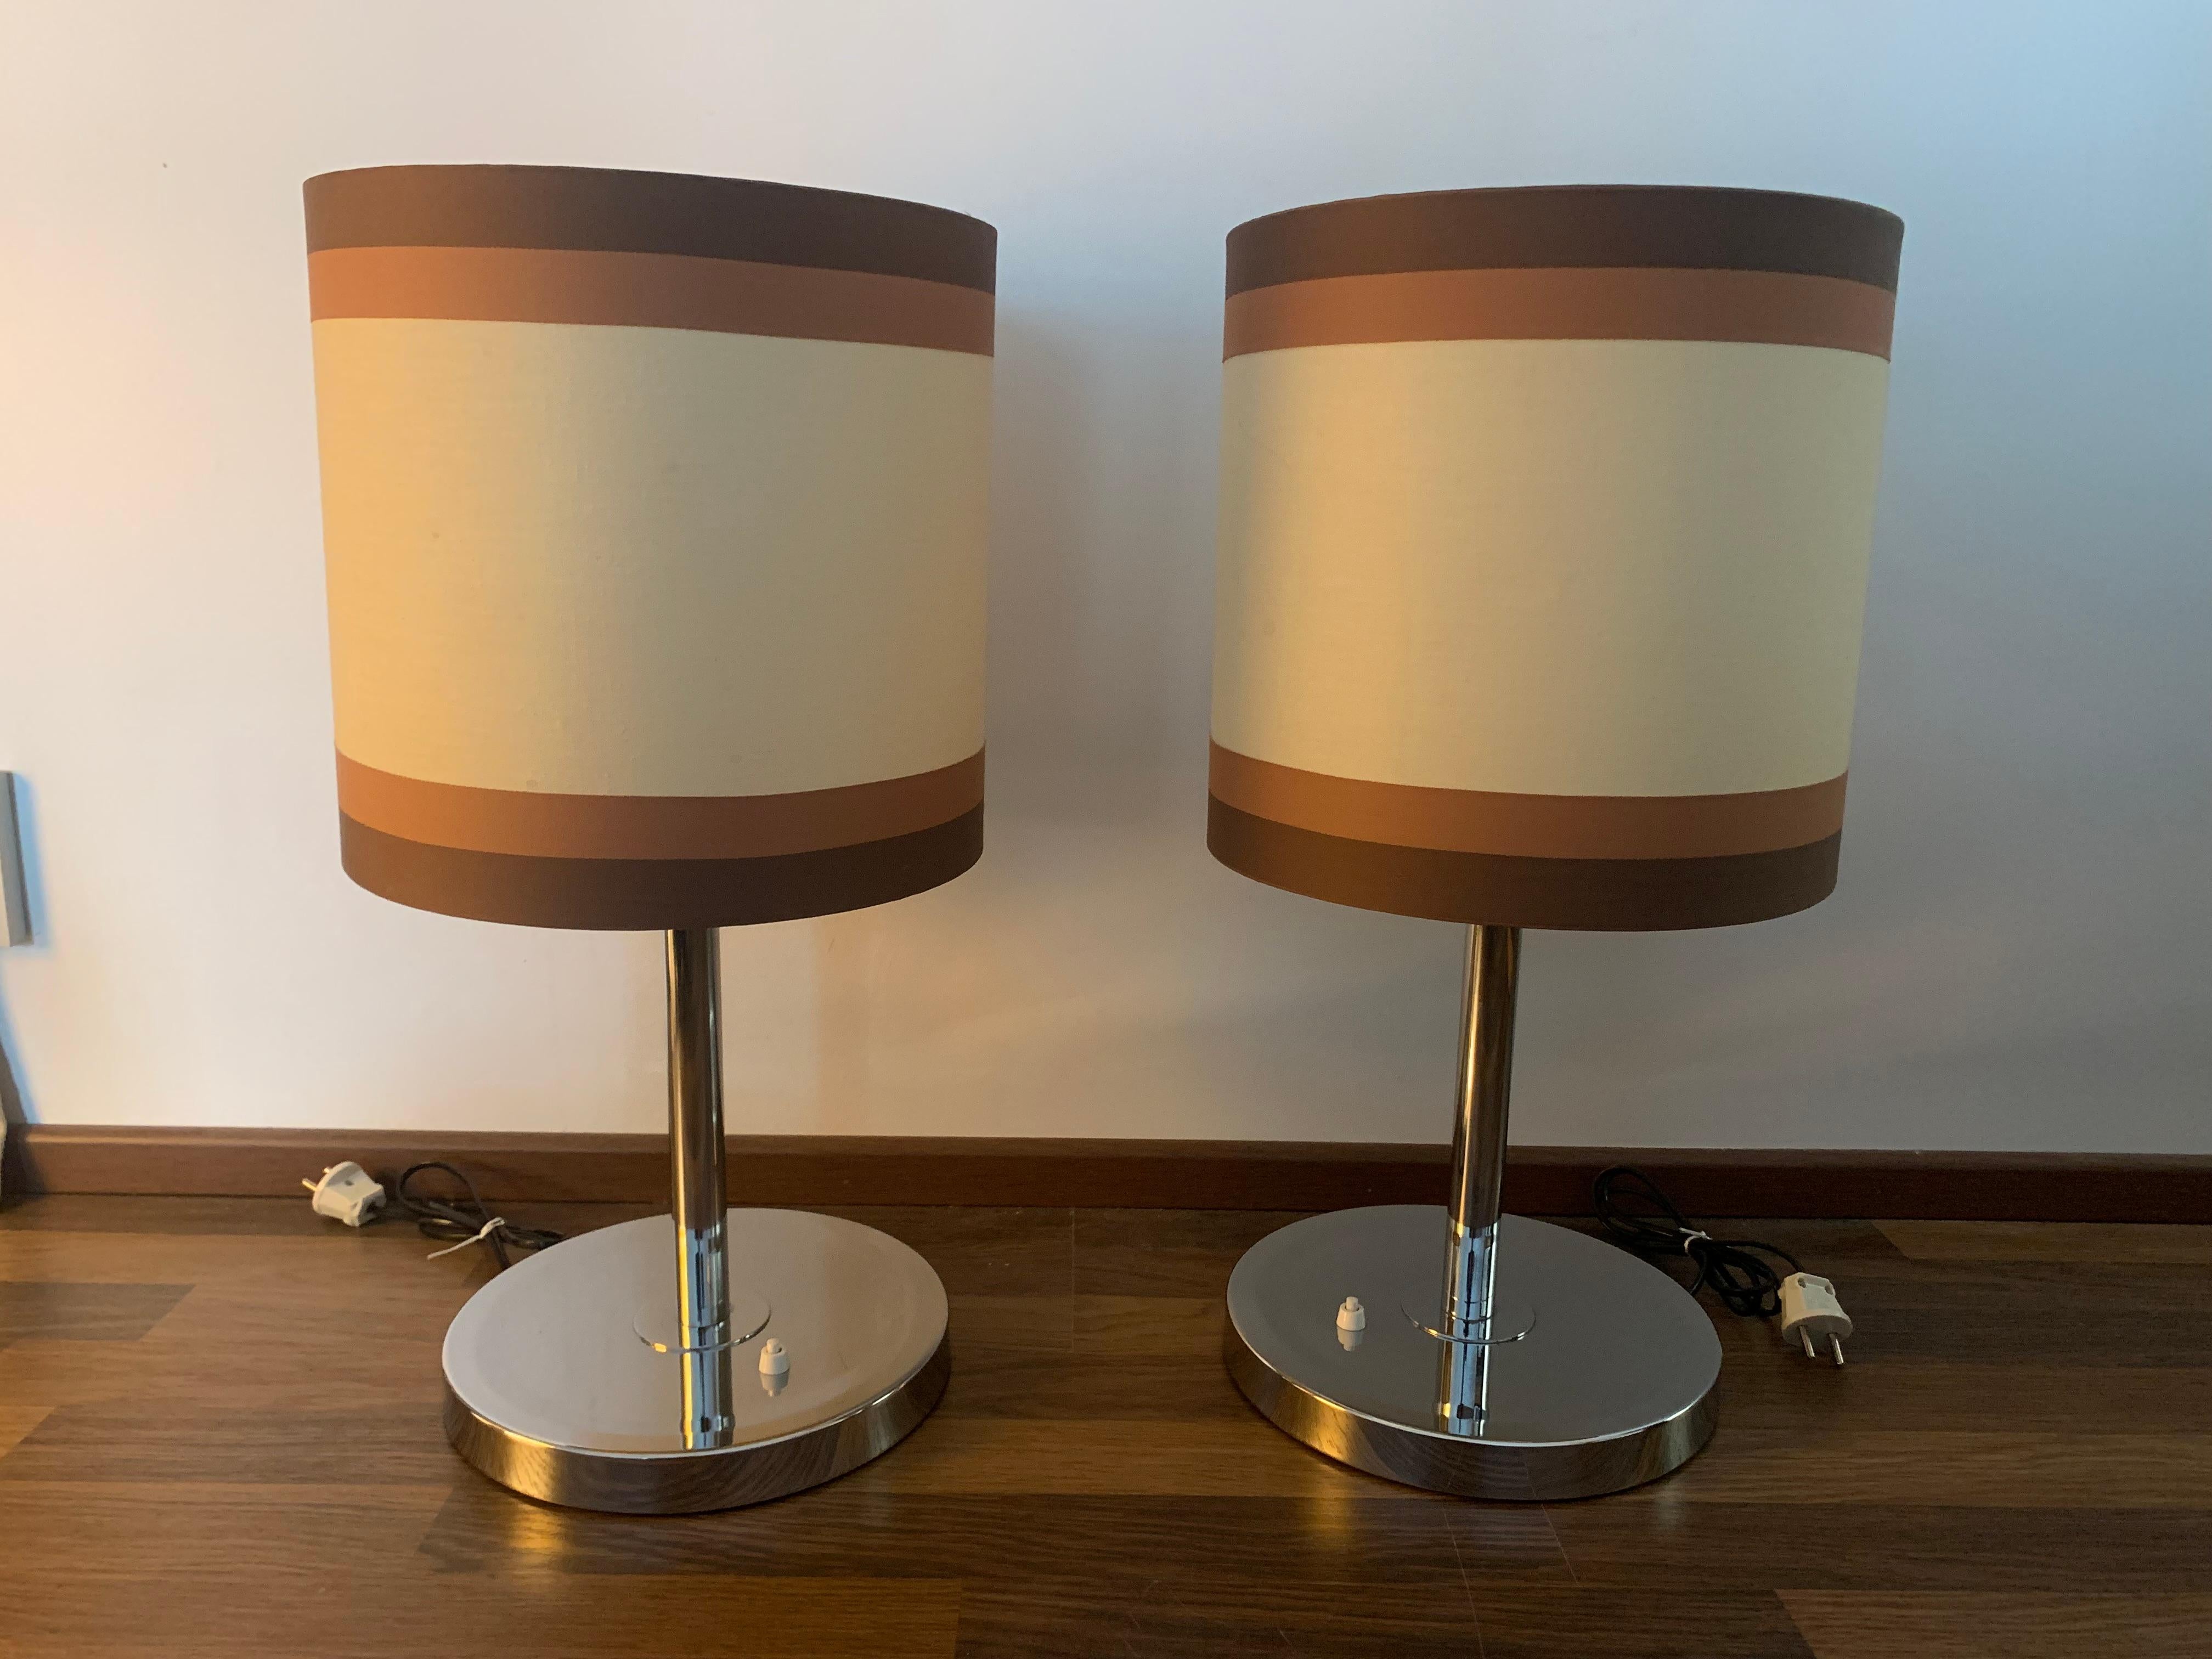 A wonderful pair of Finnish design lamps, the lamps are decorated with original shades, which are in good original condition. these lamps can be used directly to light up your home.